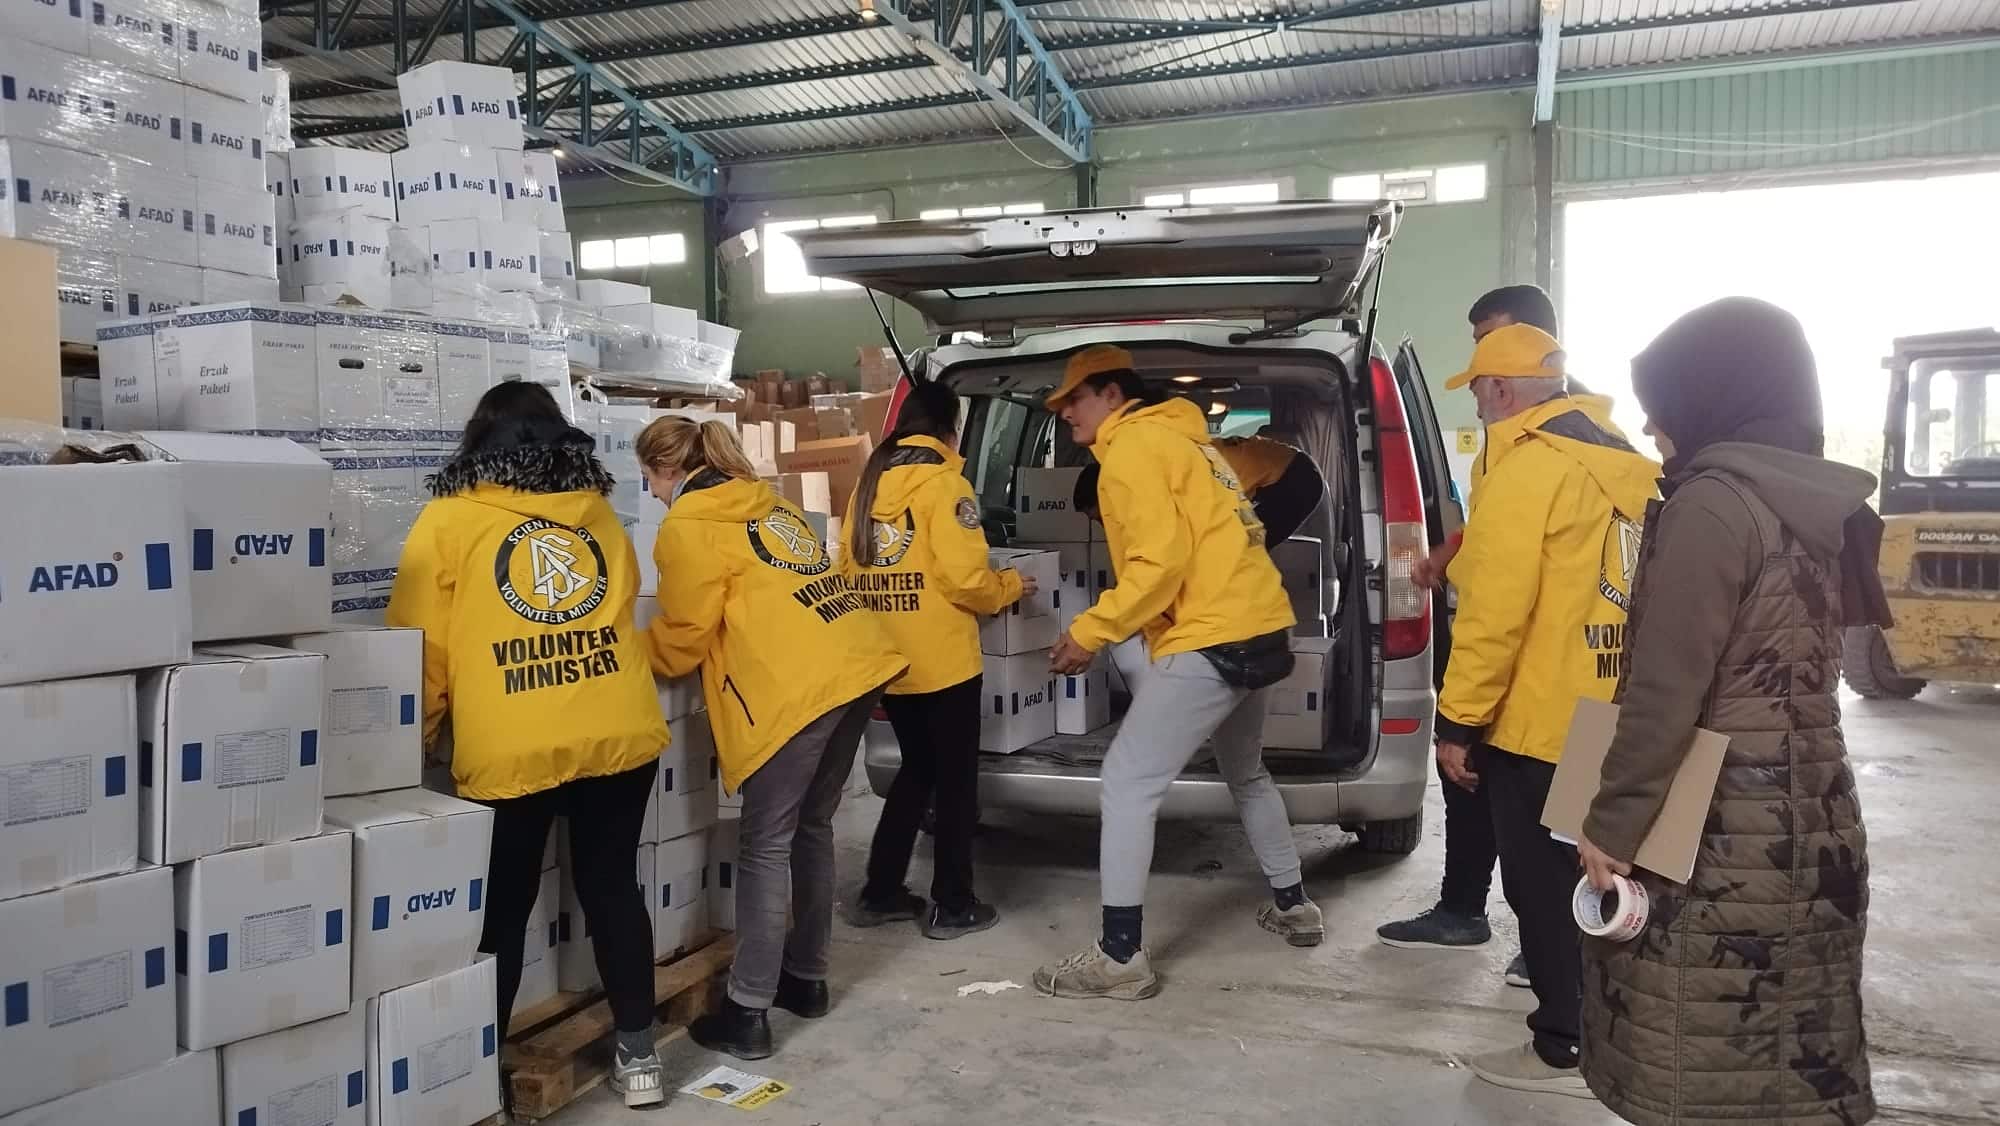 Scientology volunteers help distribute 78 tonnes of donated food, clothes and other to those who need it in Turkey